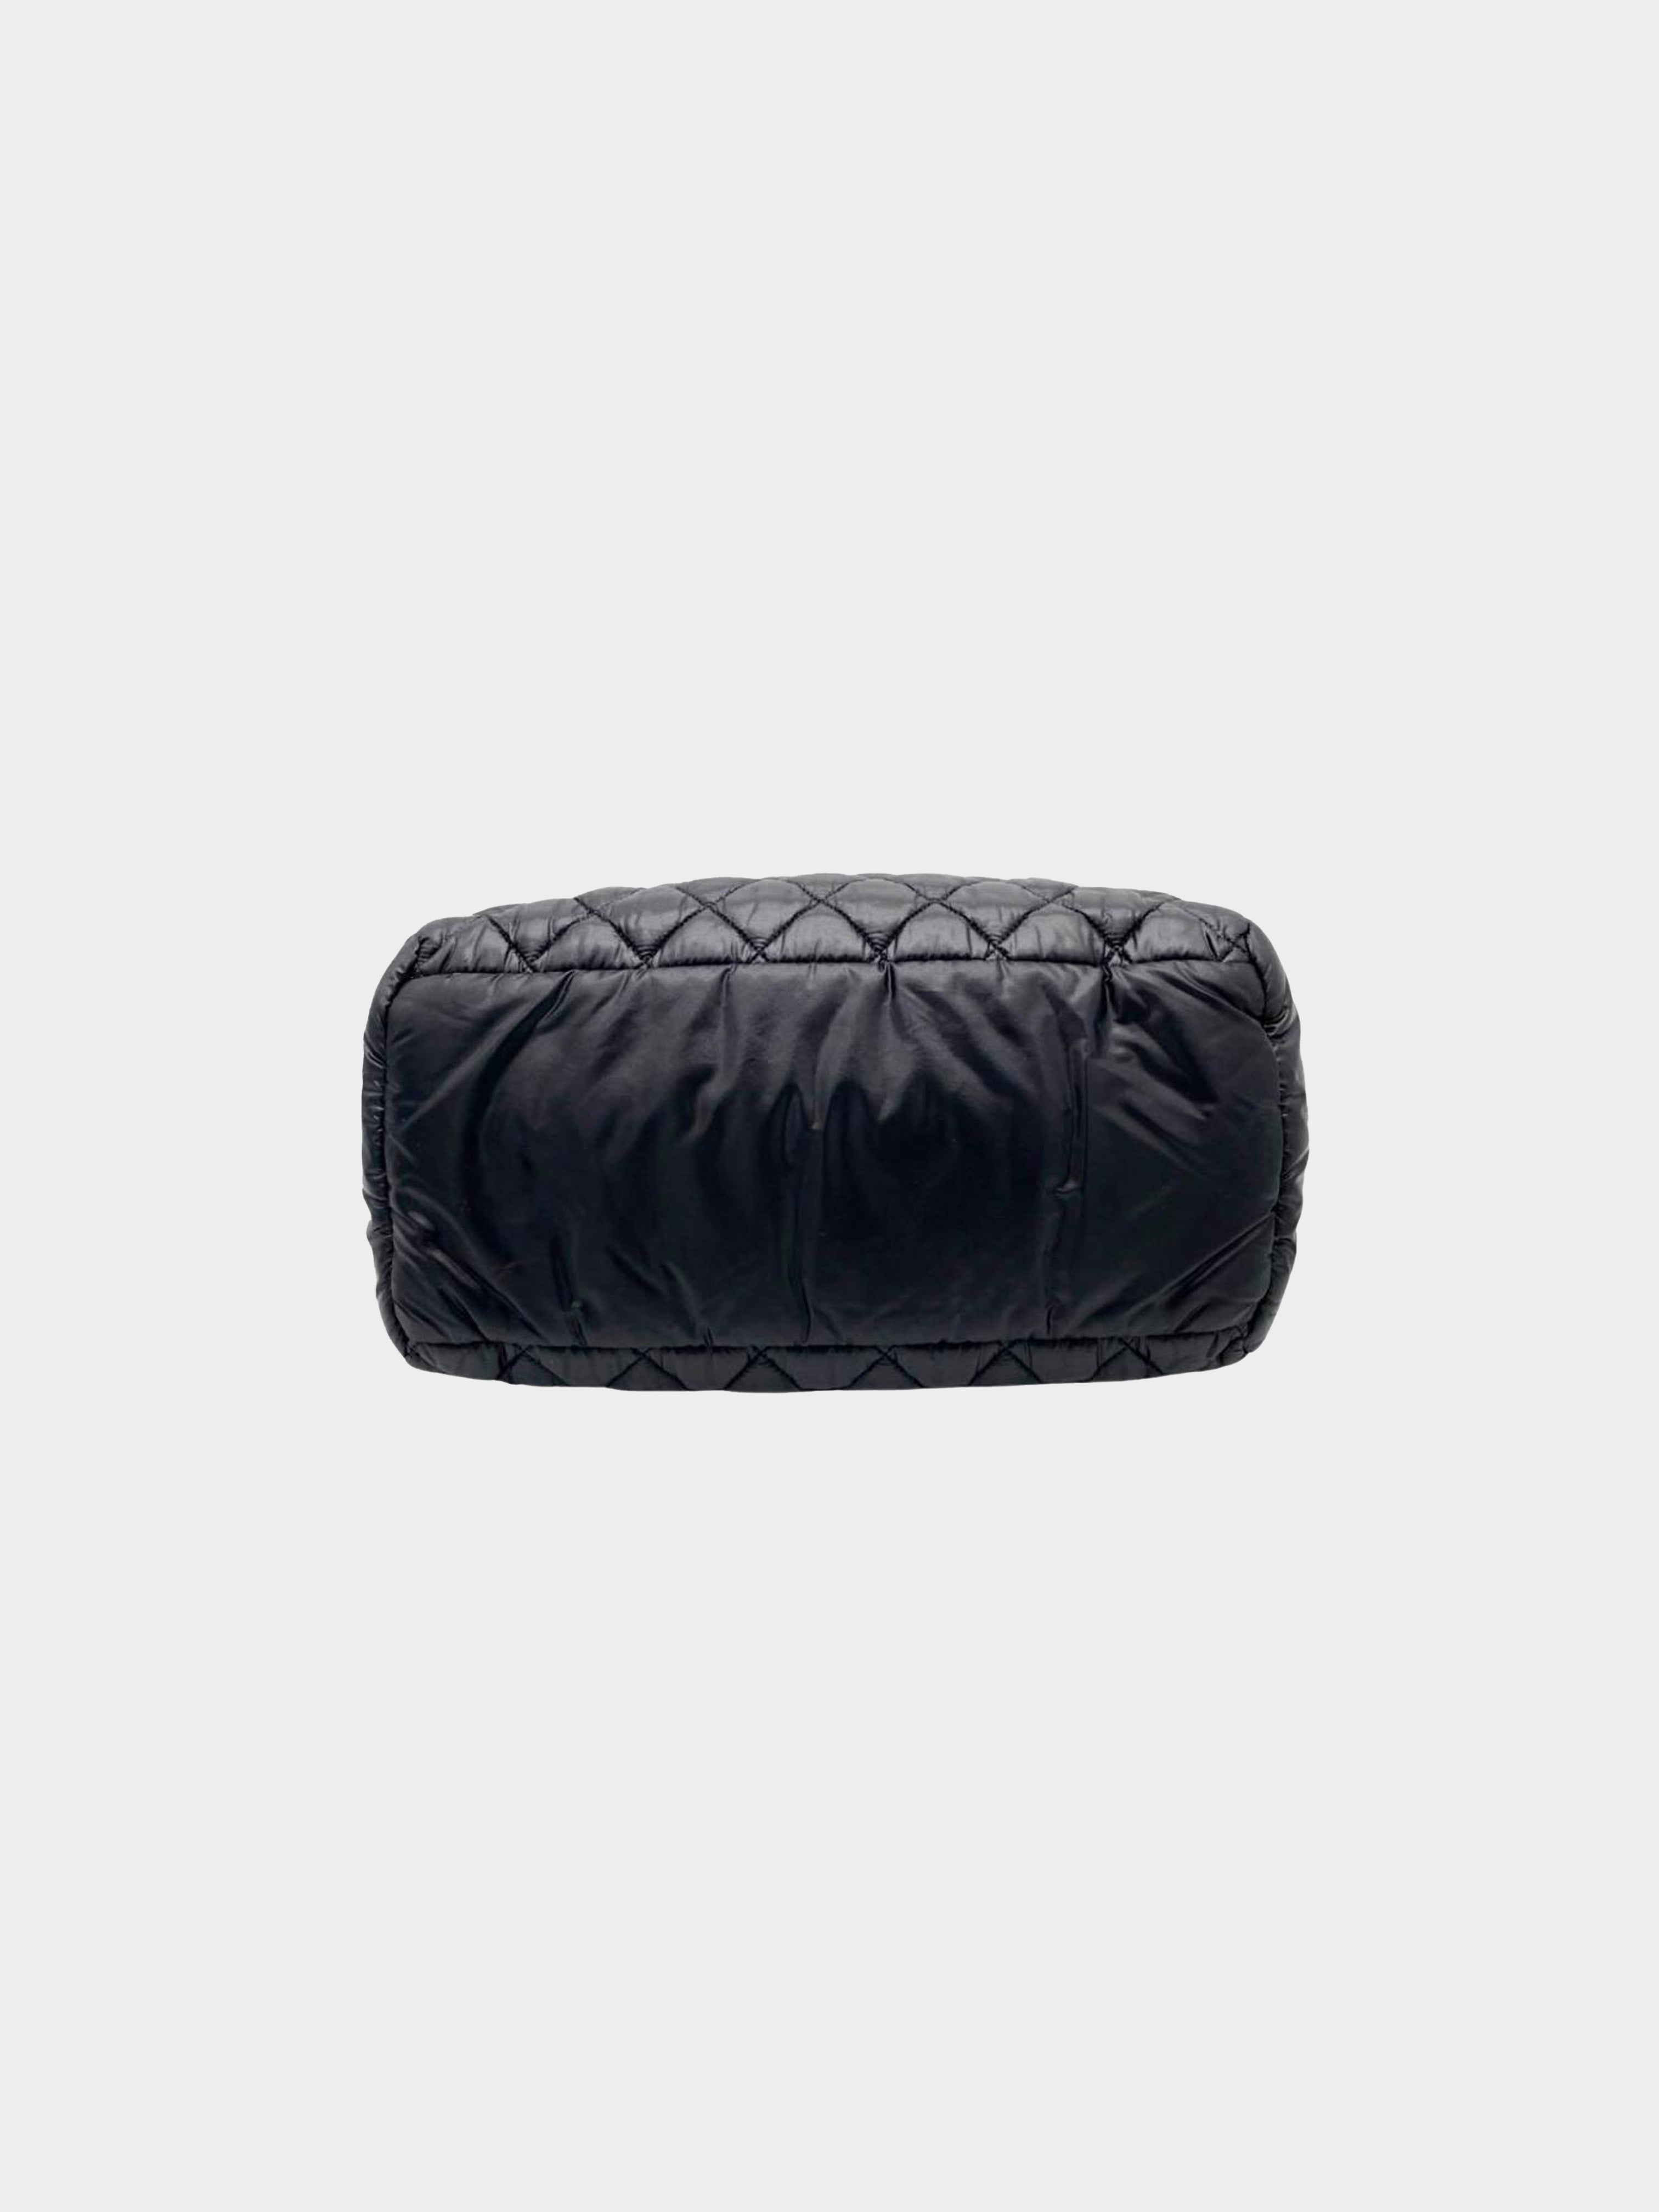 Chanel 2009 Coco Cocoon Puffer Bag